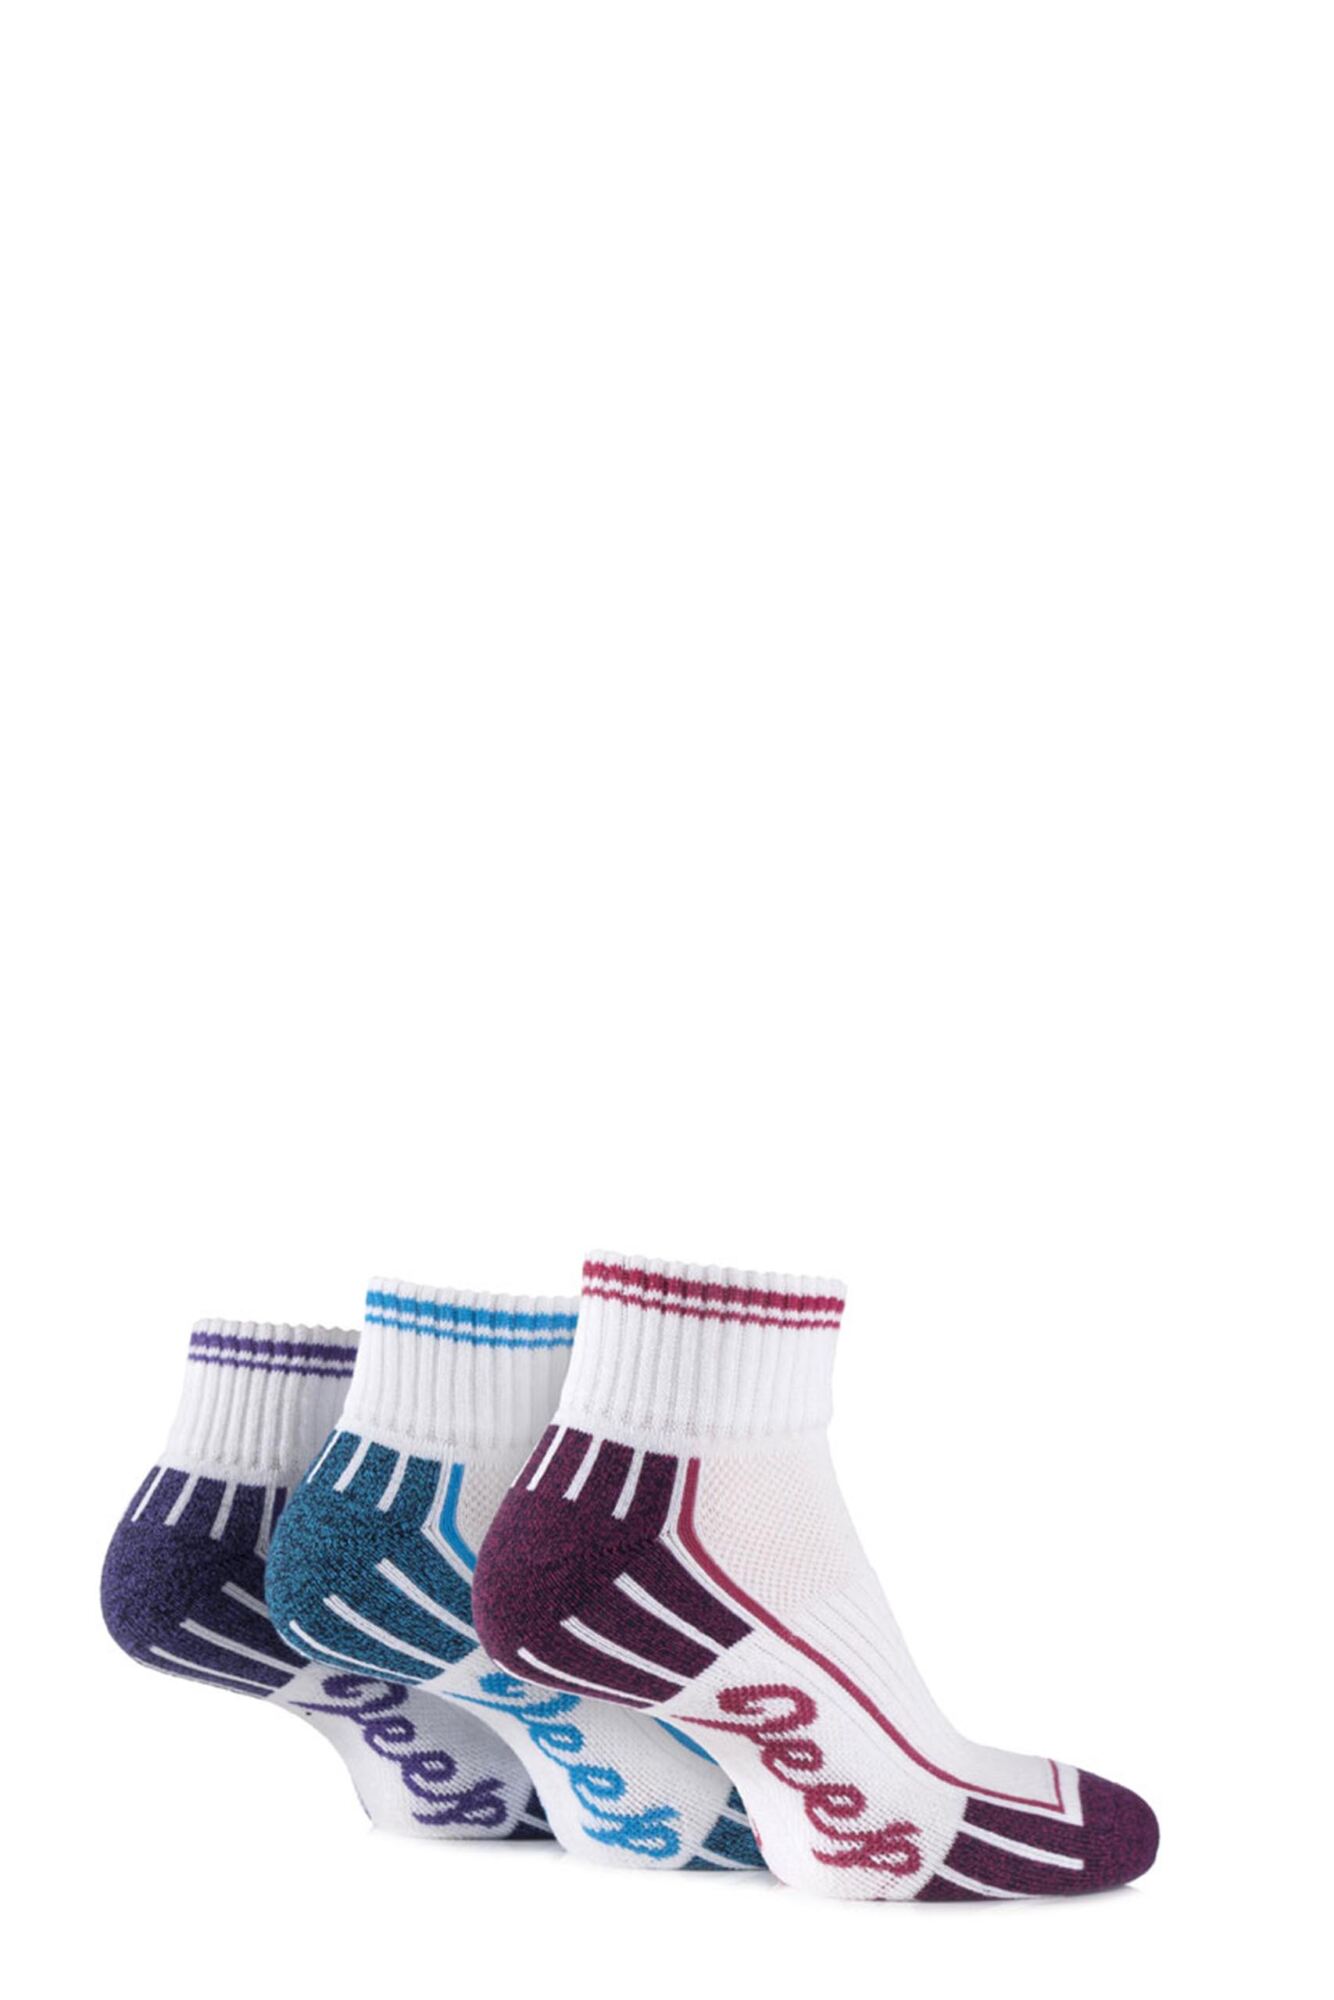 3 Pair Cushioned Cotton Ankle Socks Ladies - Jeep